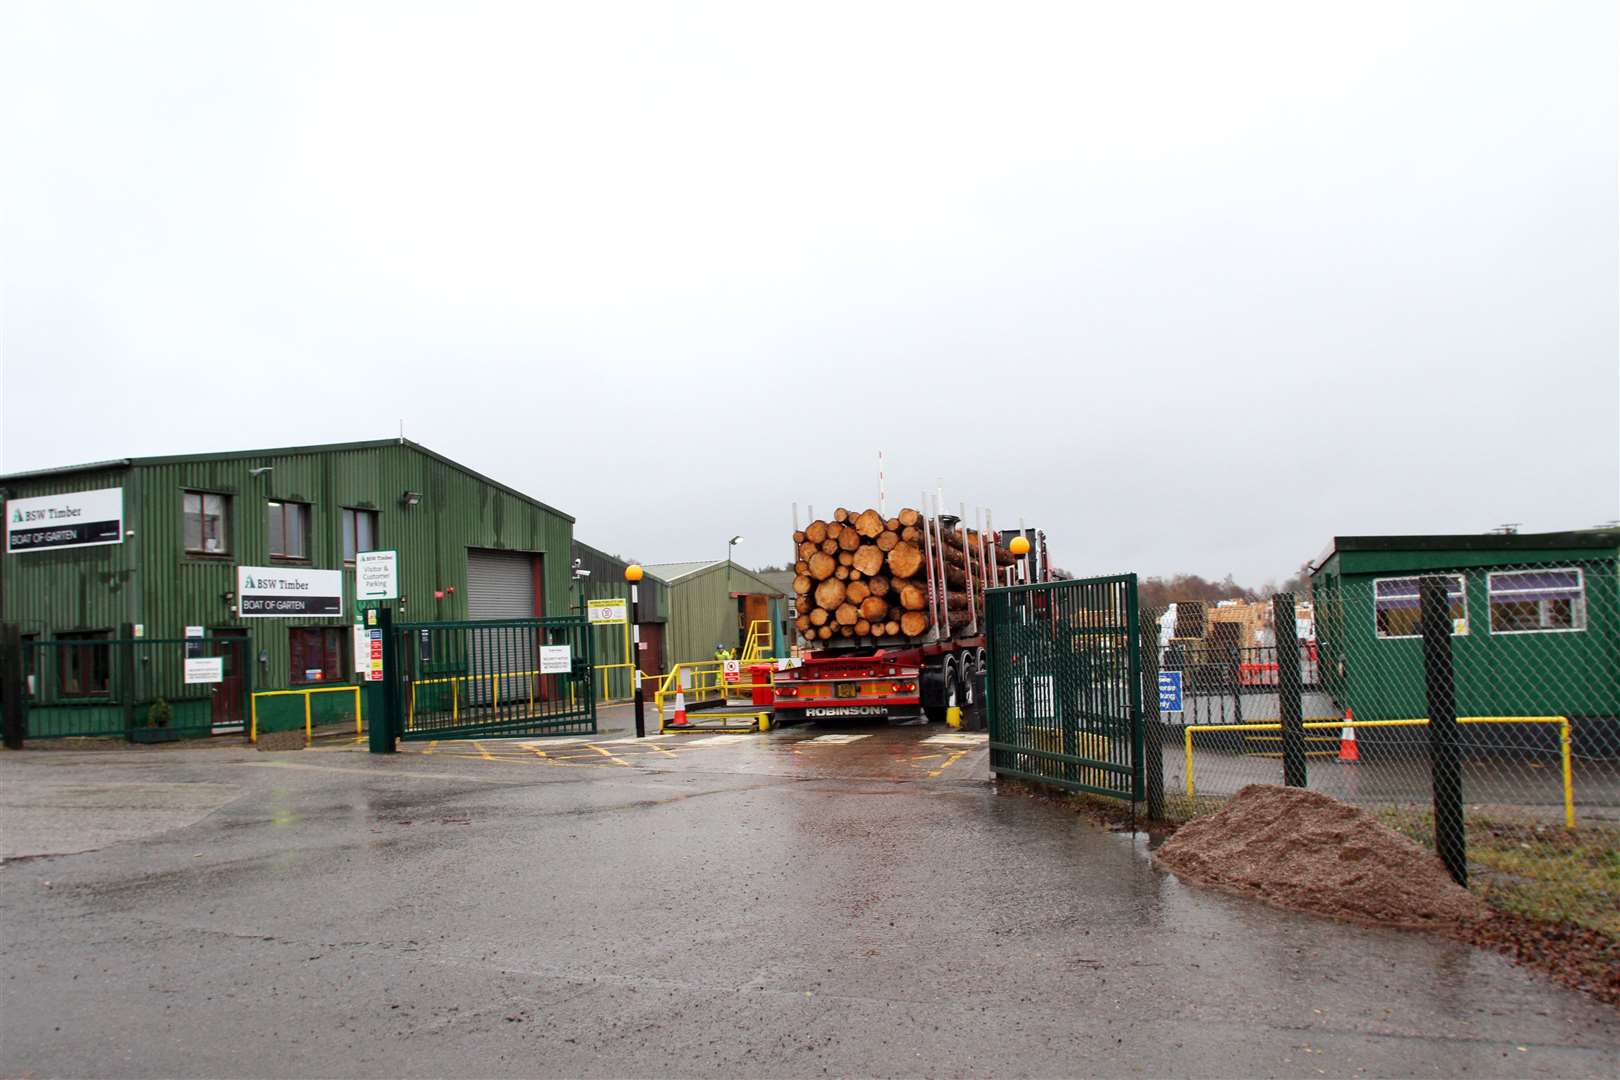 BSW's Boat of Garten site is due to close at the end of next month with the loss of 40 jobs.